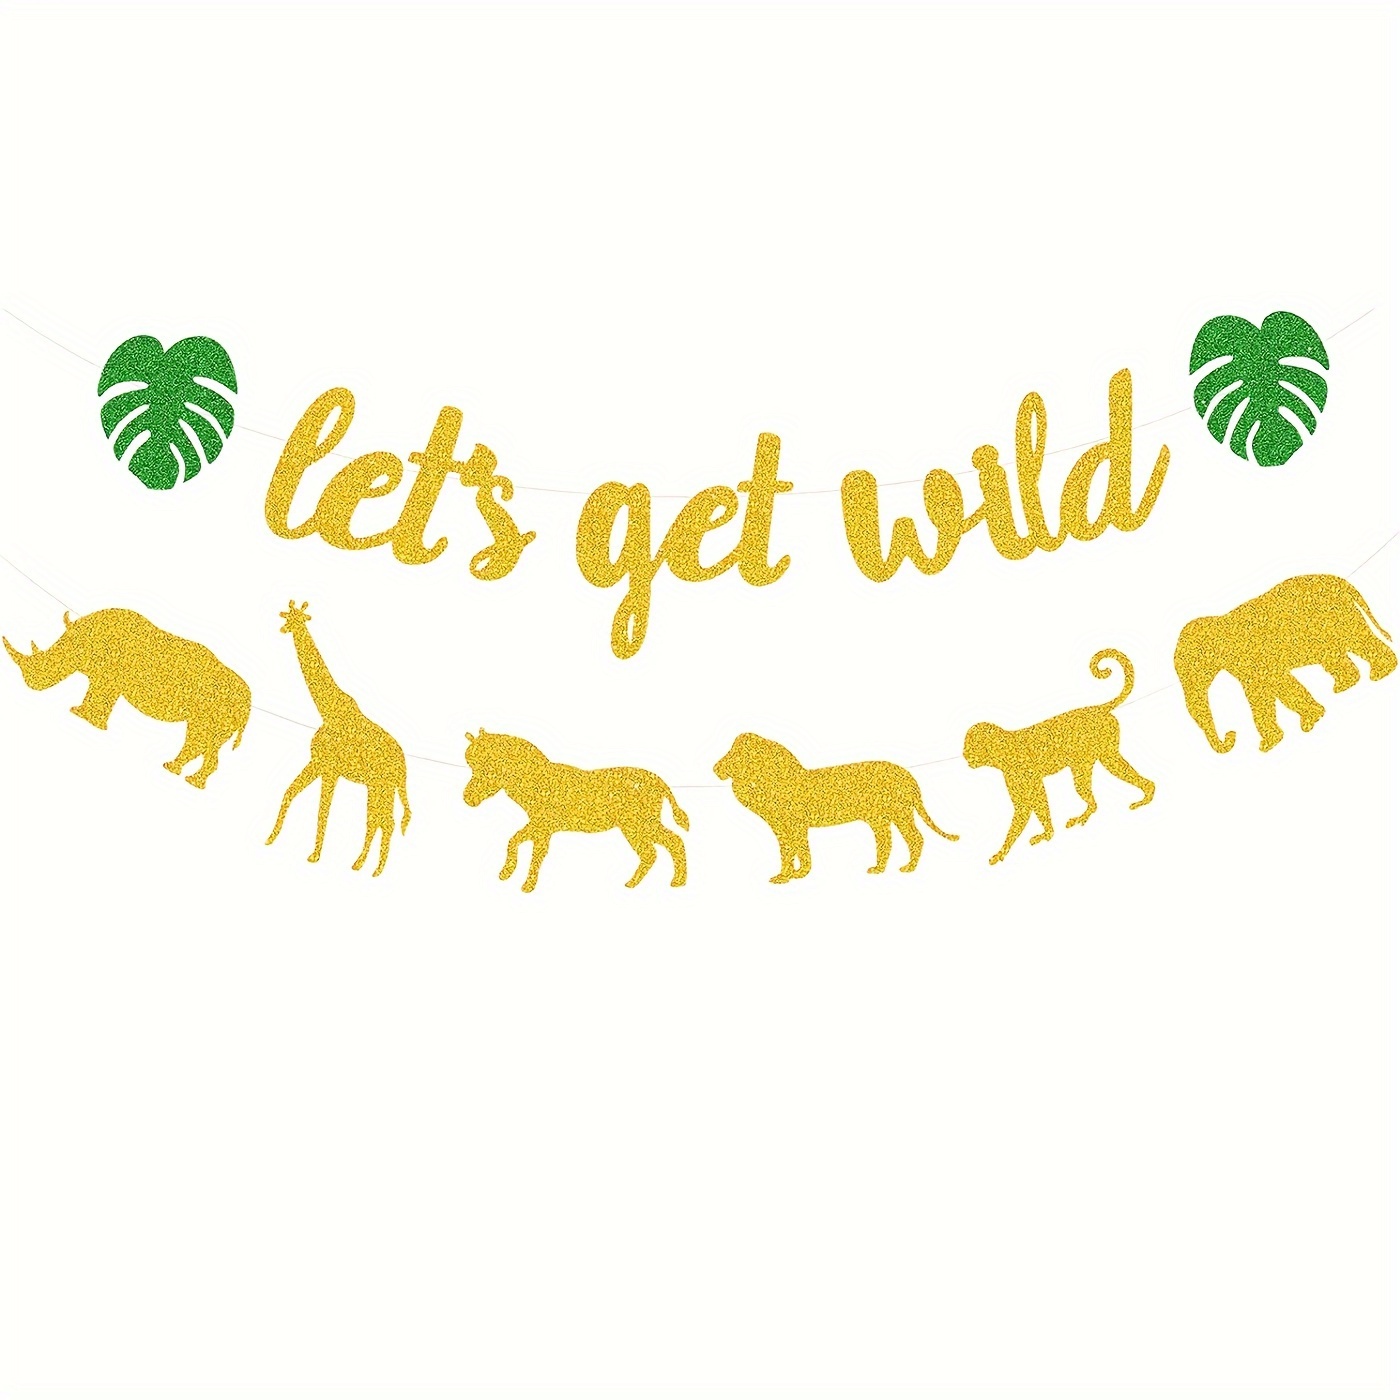 

Let's Get Wild Banner - Jungle Safari Animal Theme Party Garland, Handmade Glitter Cardstock, Multipurpose Birthday & Universal Holiday Decor, No Electricity Required